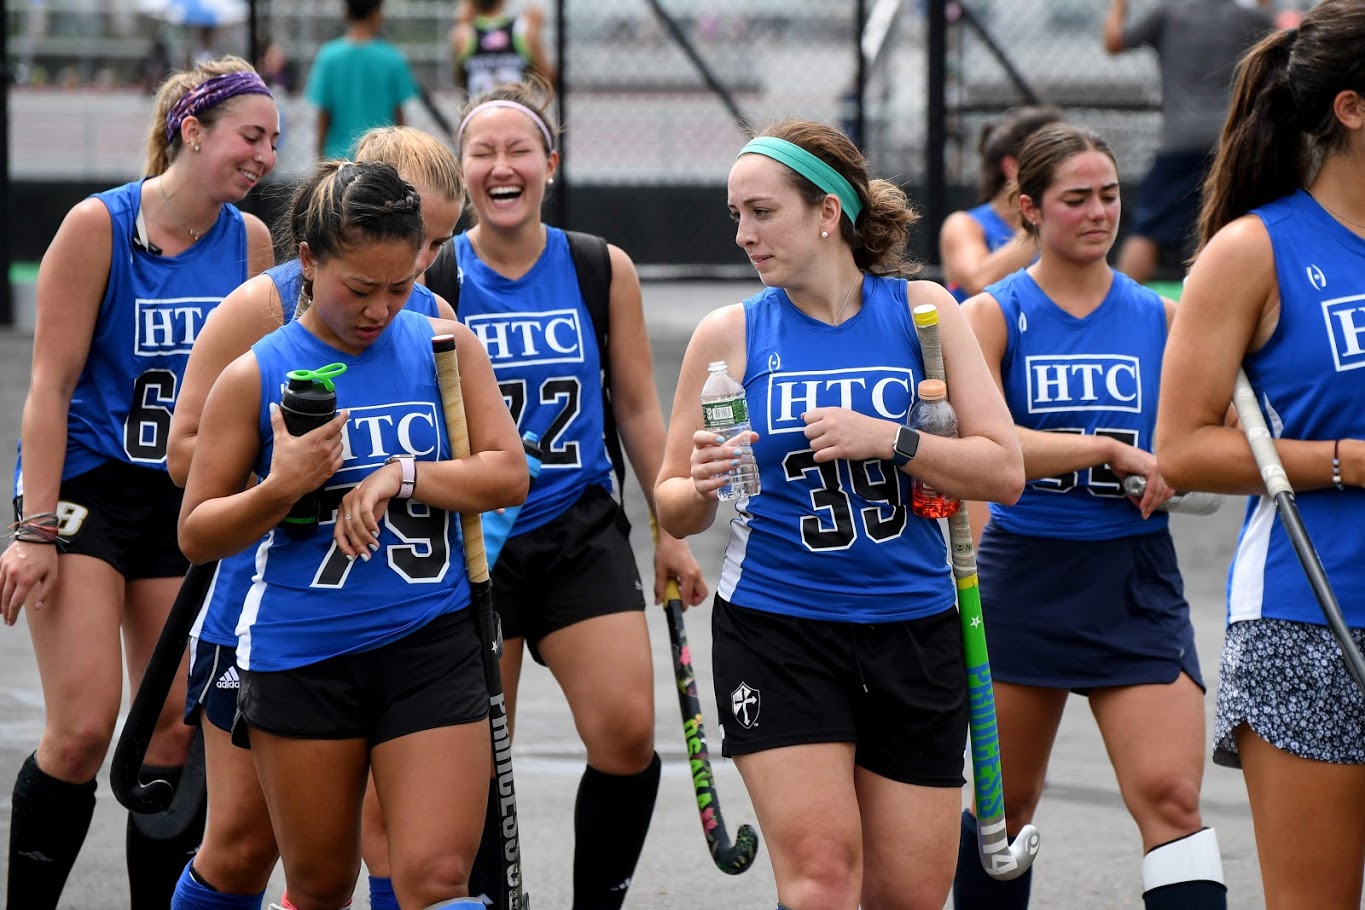 HTC Adult and Collegiate Programs – HTC Field Hockey